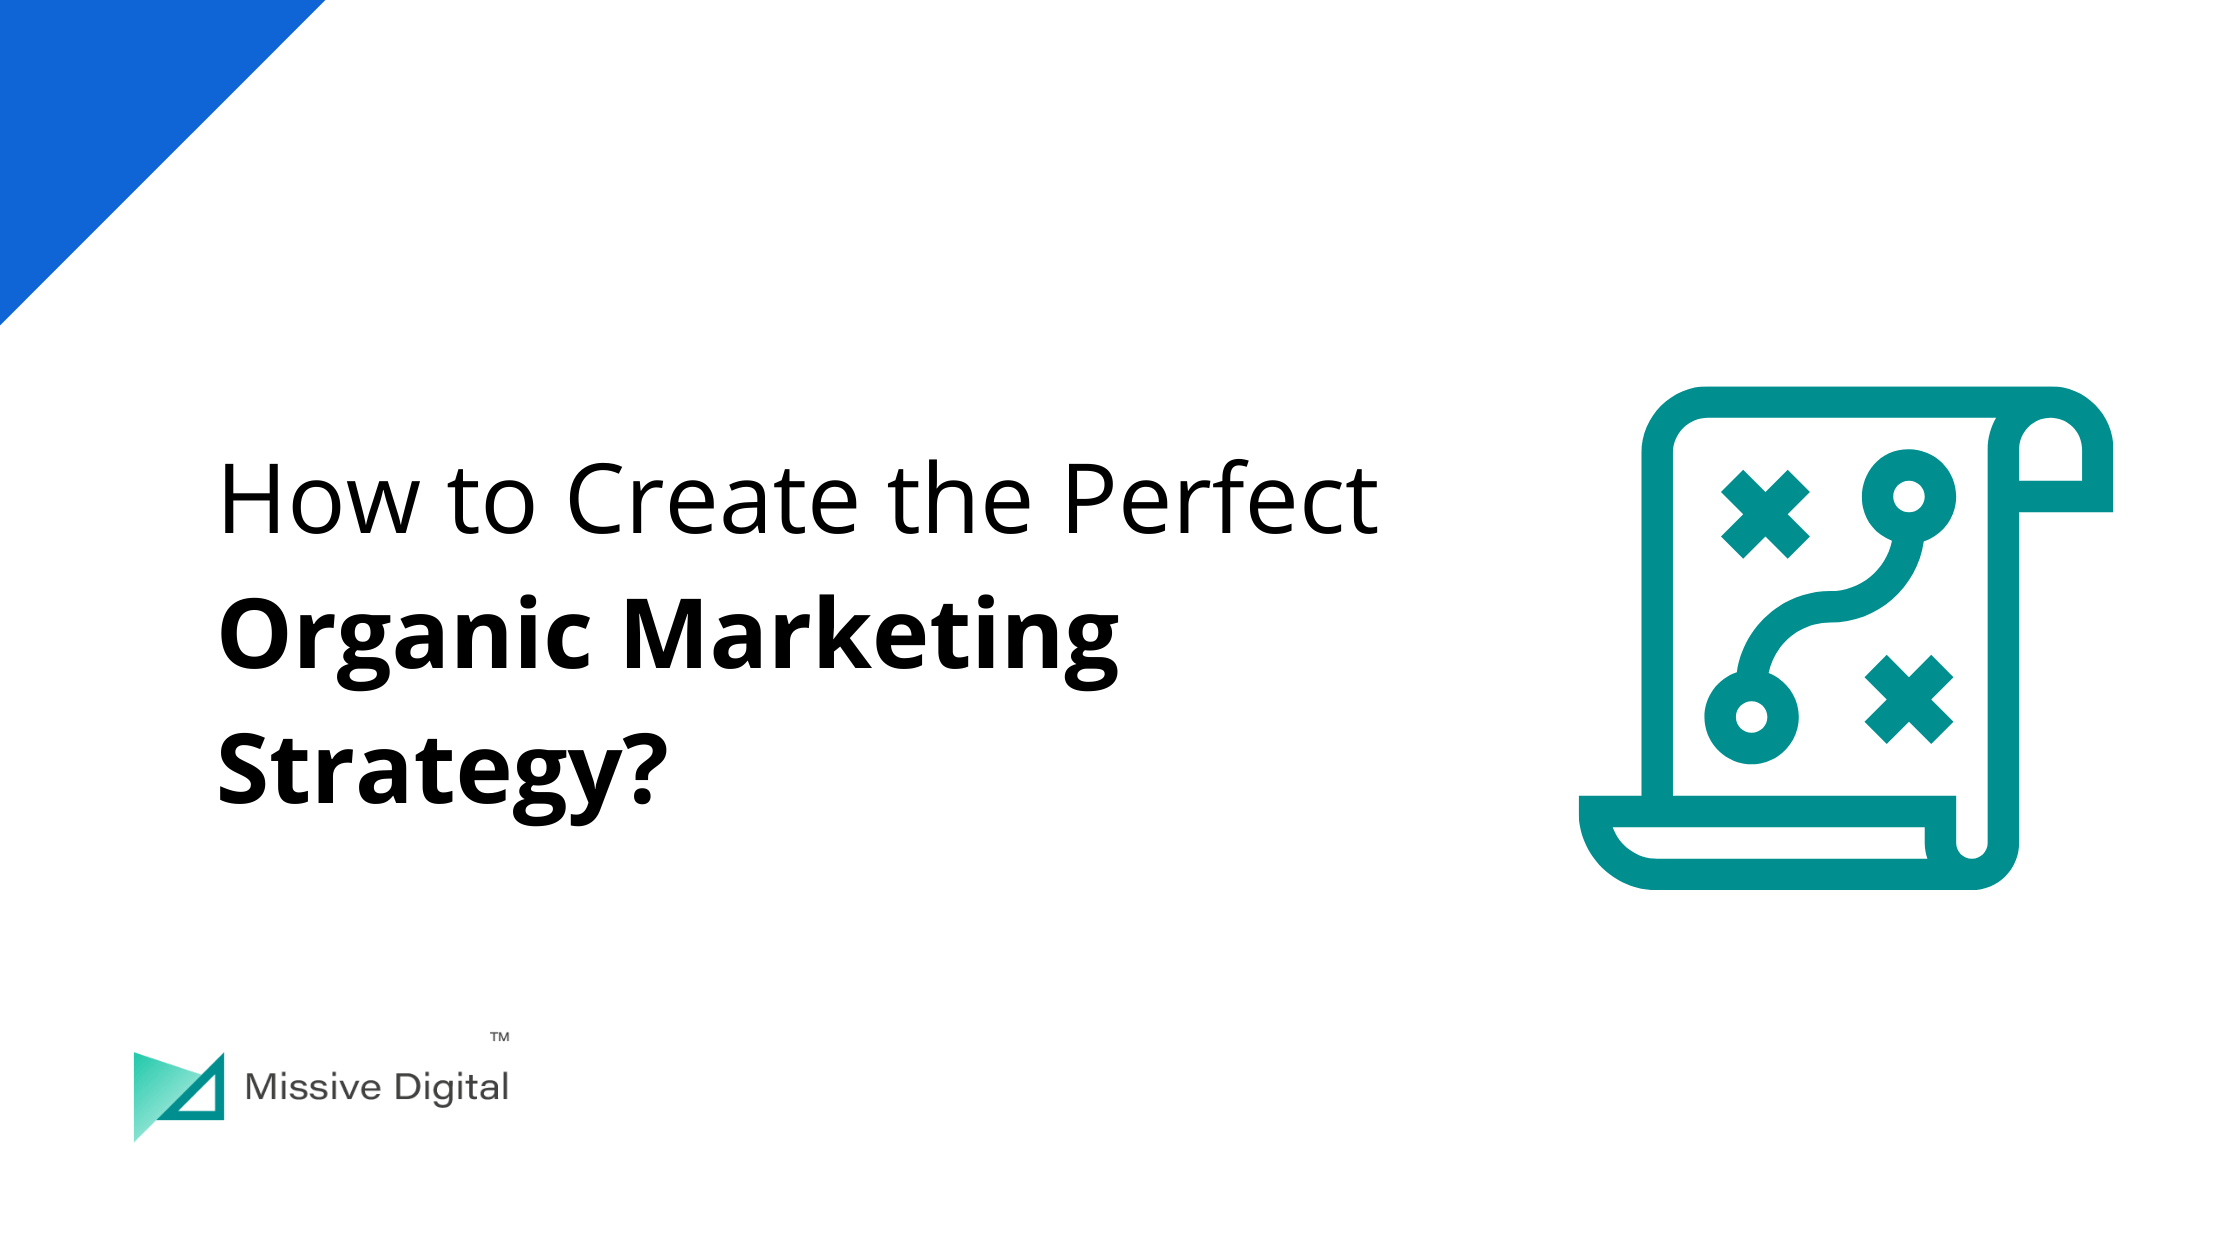 How to Create the Perfect Organic Marketing Strategy?